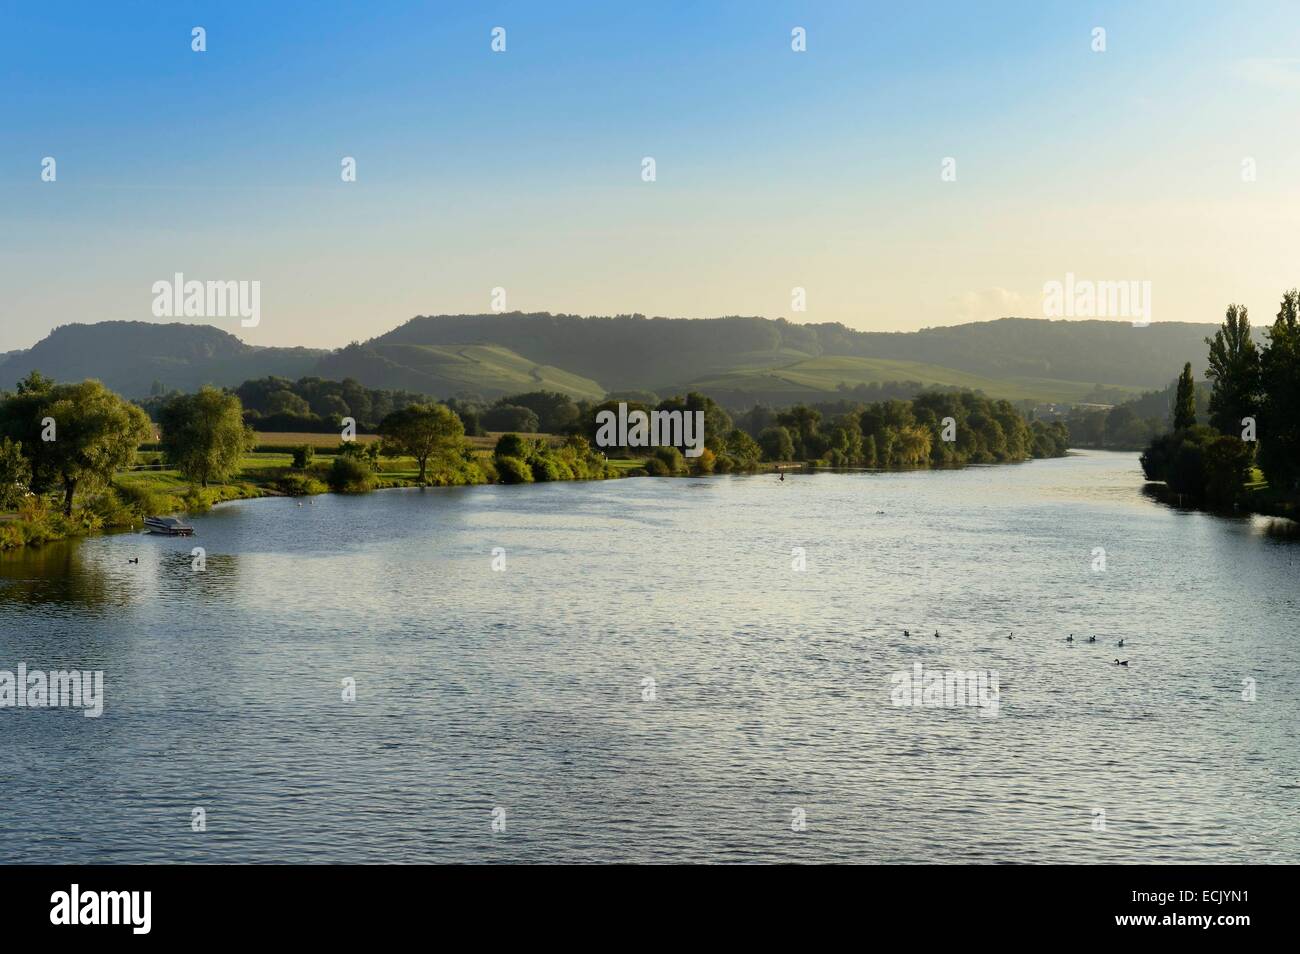 Luxembourg, Grevenmacher district, Moselle region, Remich, the Moselle river marks the border between Germany left and Luxembourg right Stock Photo